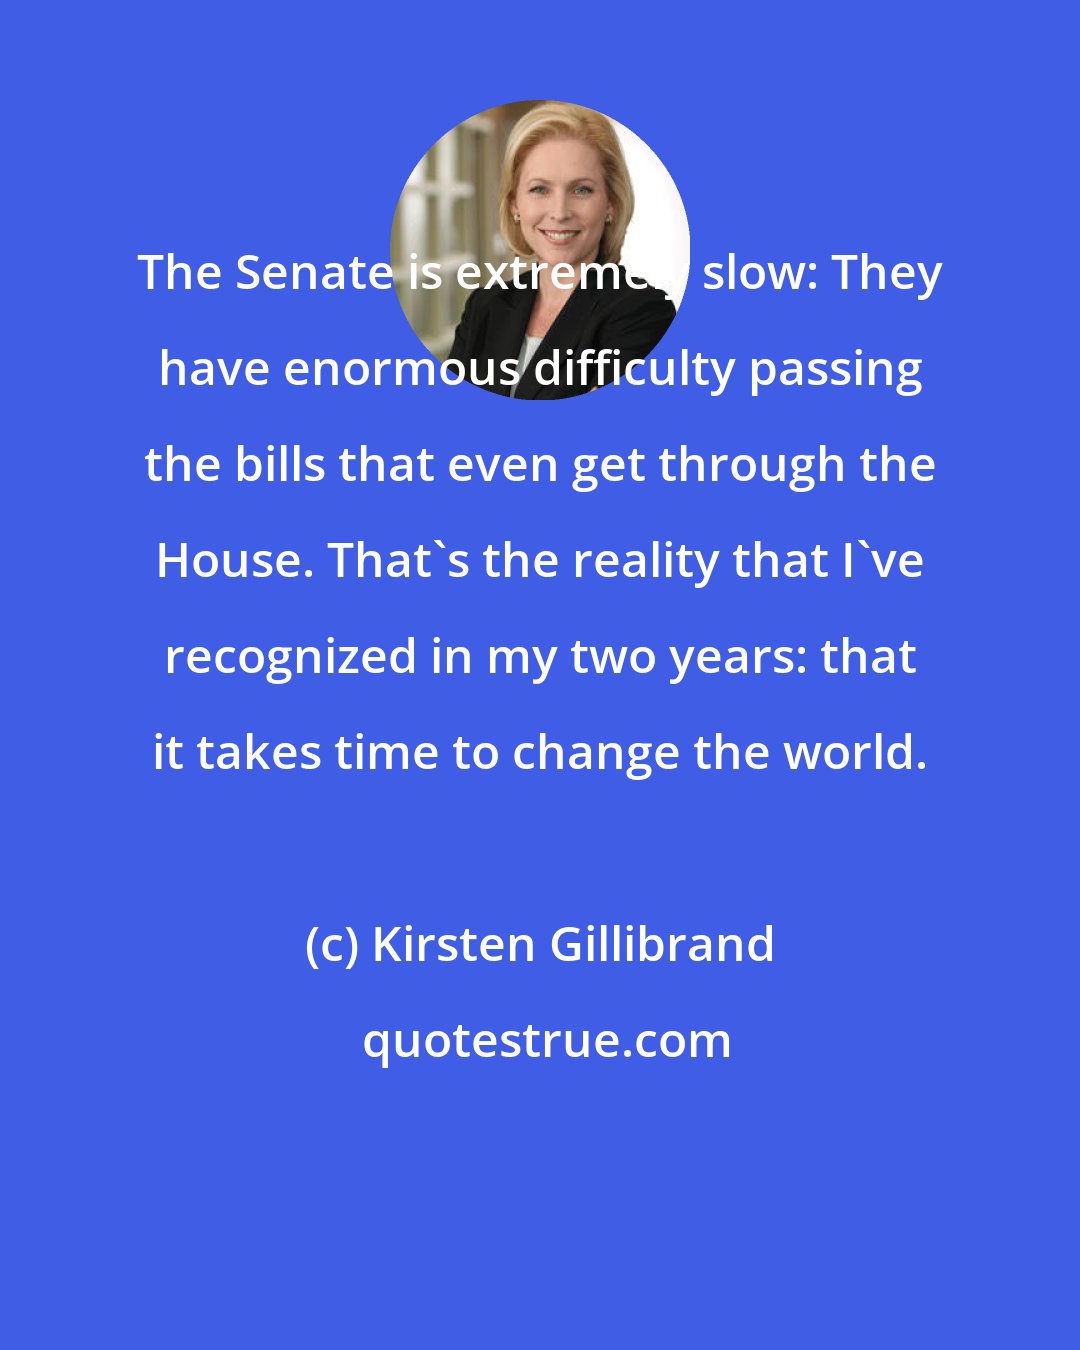 Kirsten Gillibrand: The Senate is extremely slow: They have enormous difficulty passing the bills that even get through the House. That's the reality that I've recognized in my two years: that it takes time to change the world.